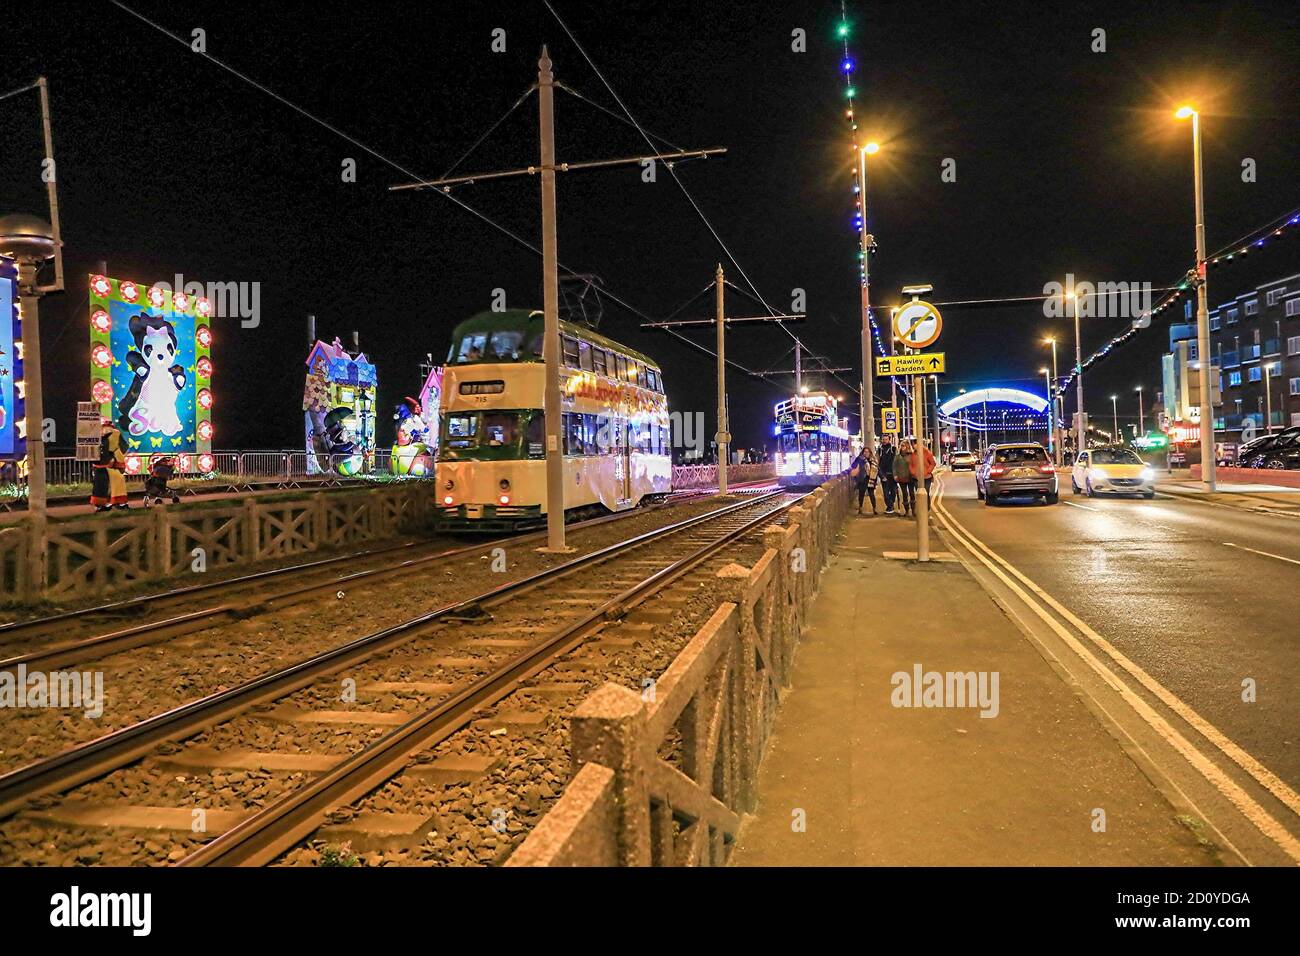 An heritage tram on the seafront at night time, Blackpool, Lancashire, England, UK Stock Photo